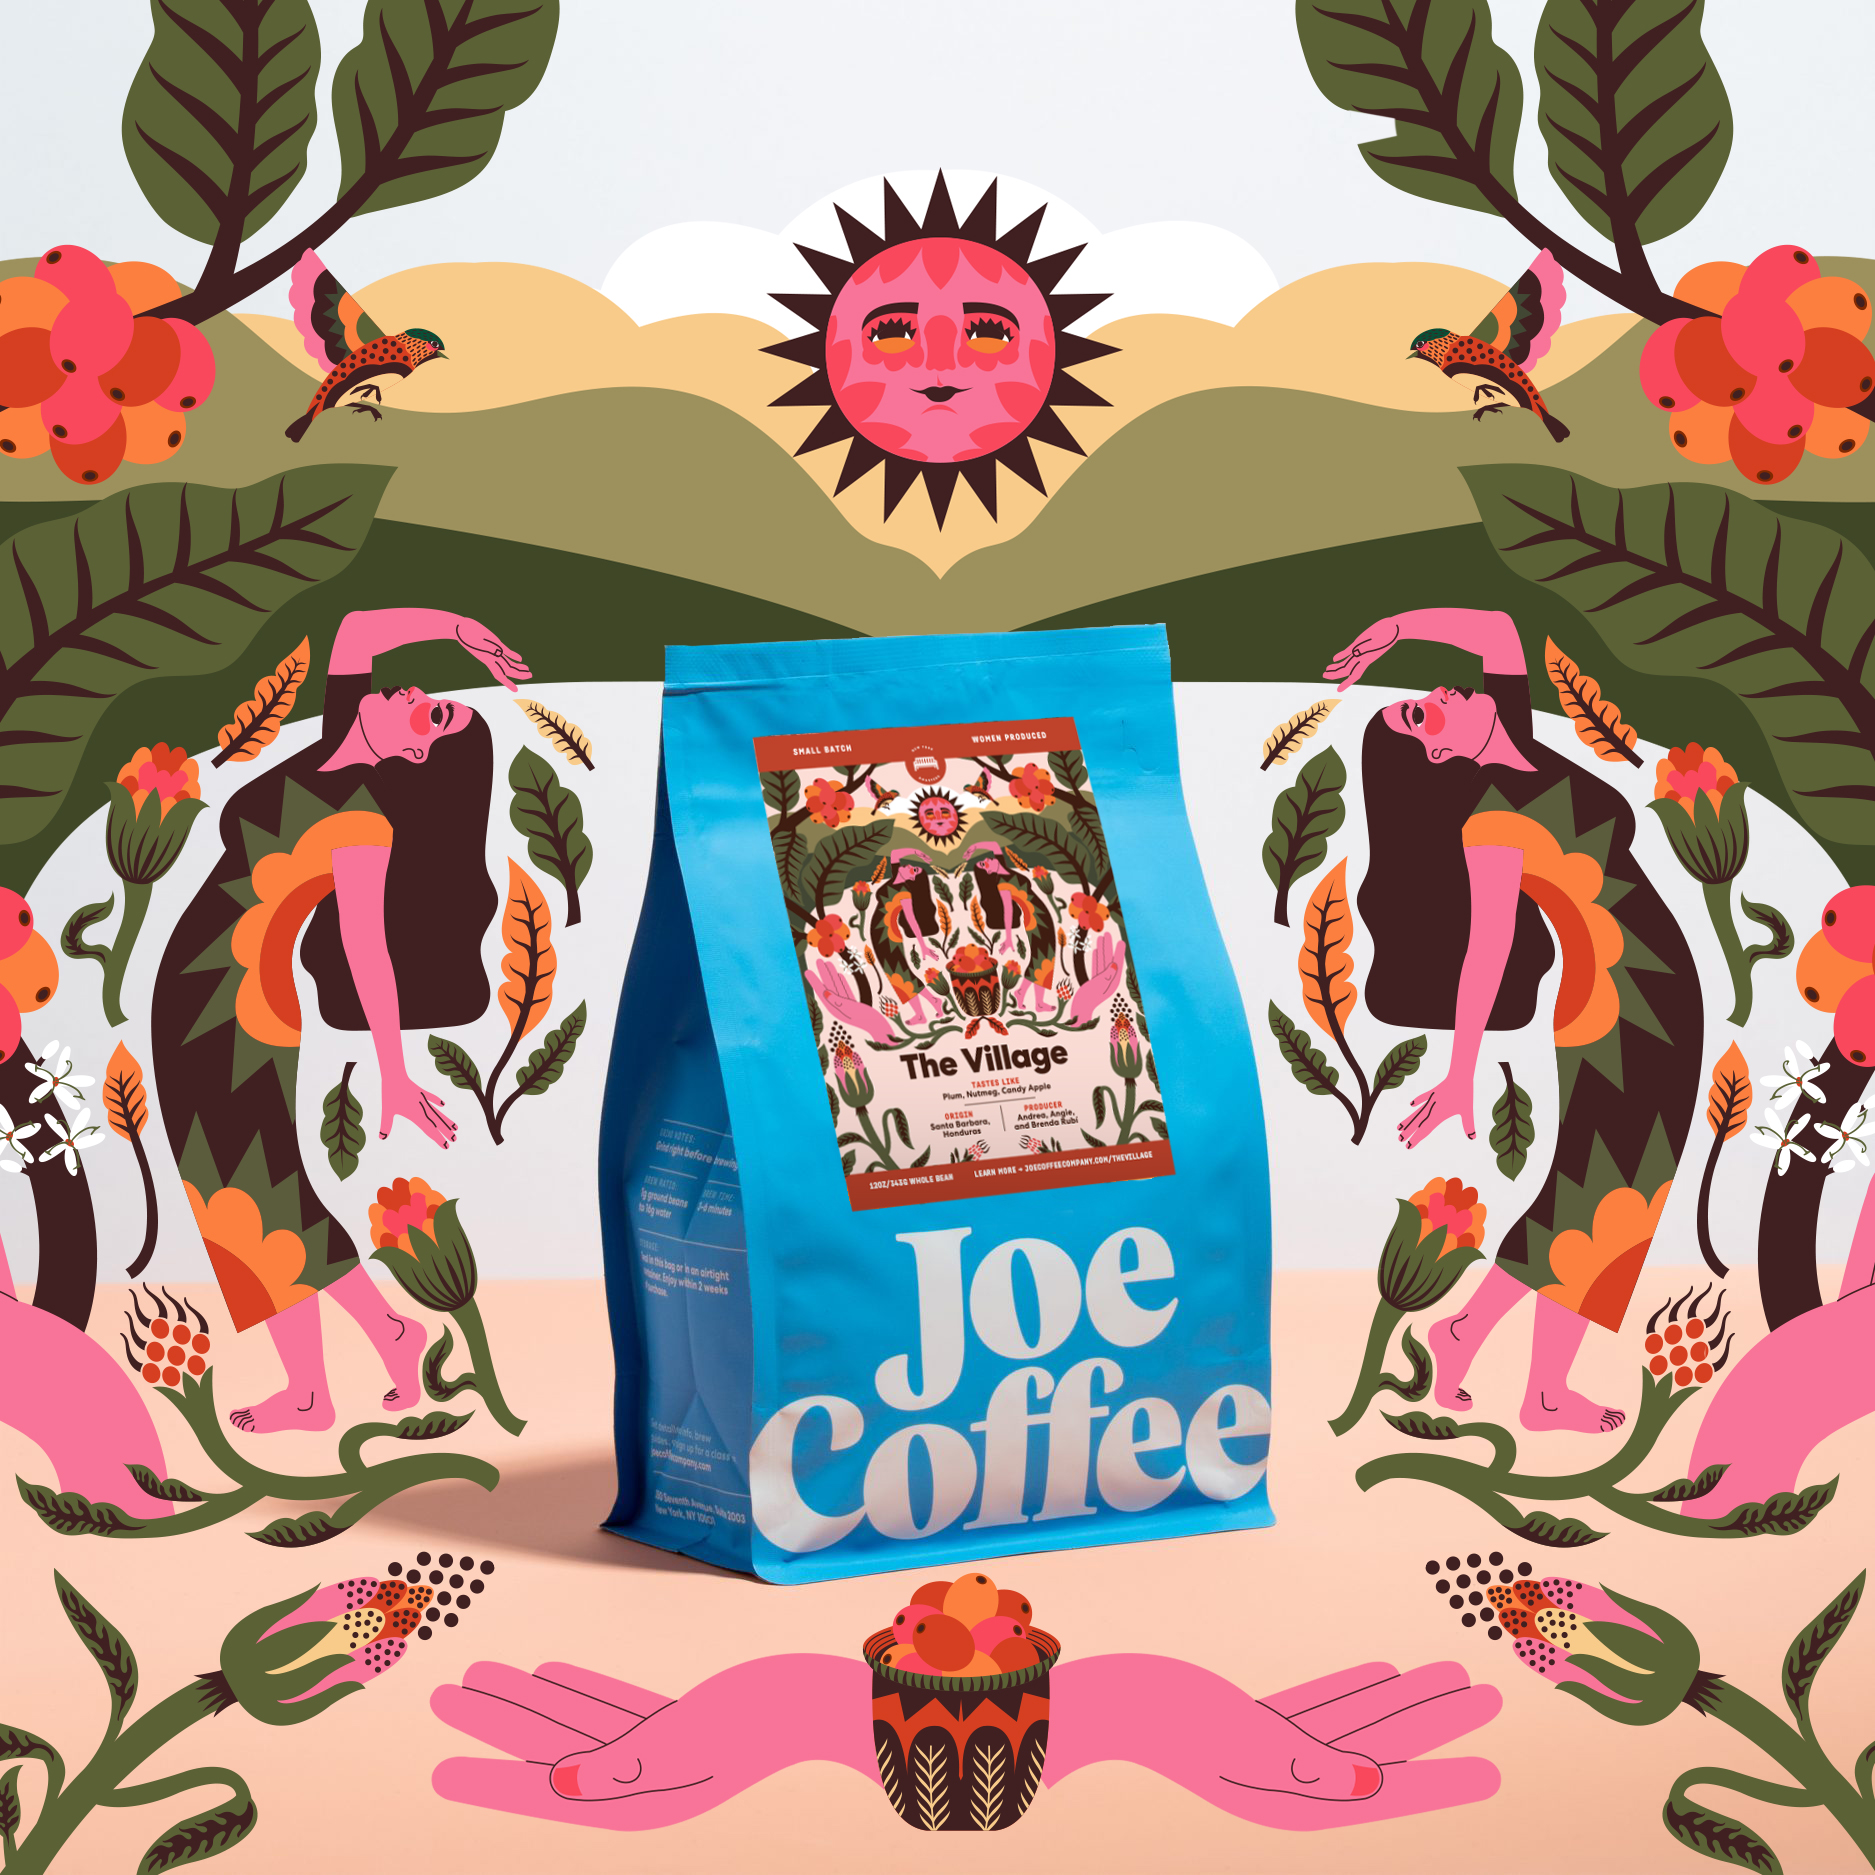 12oz Bag of The Village, a women-produced coffee